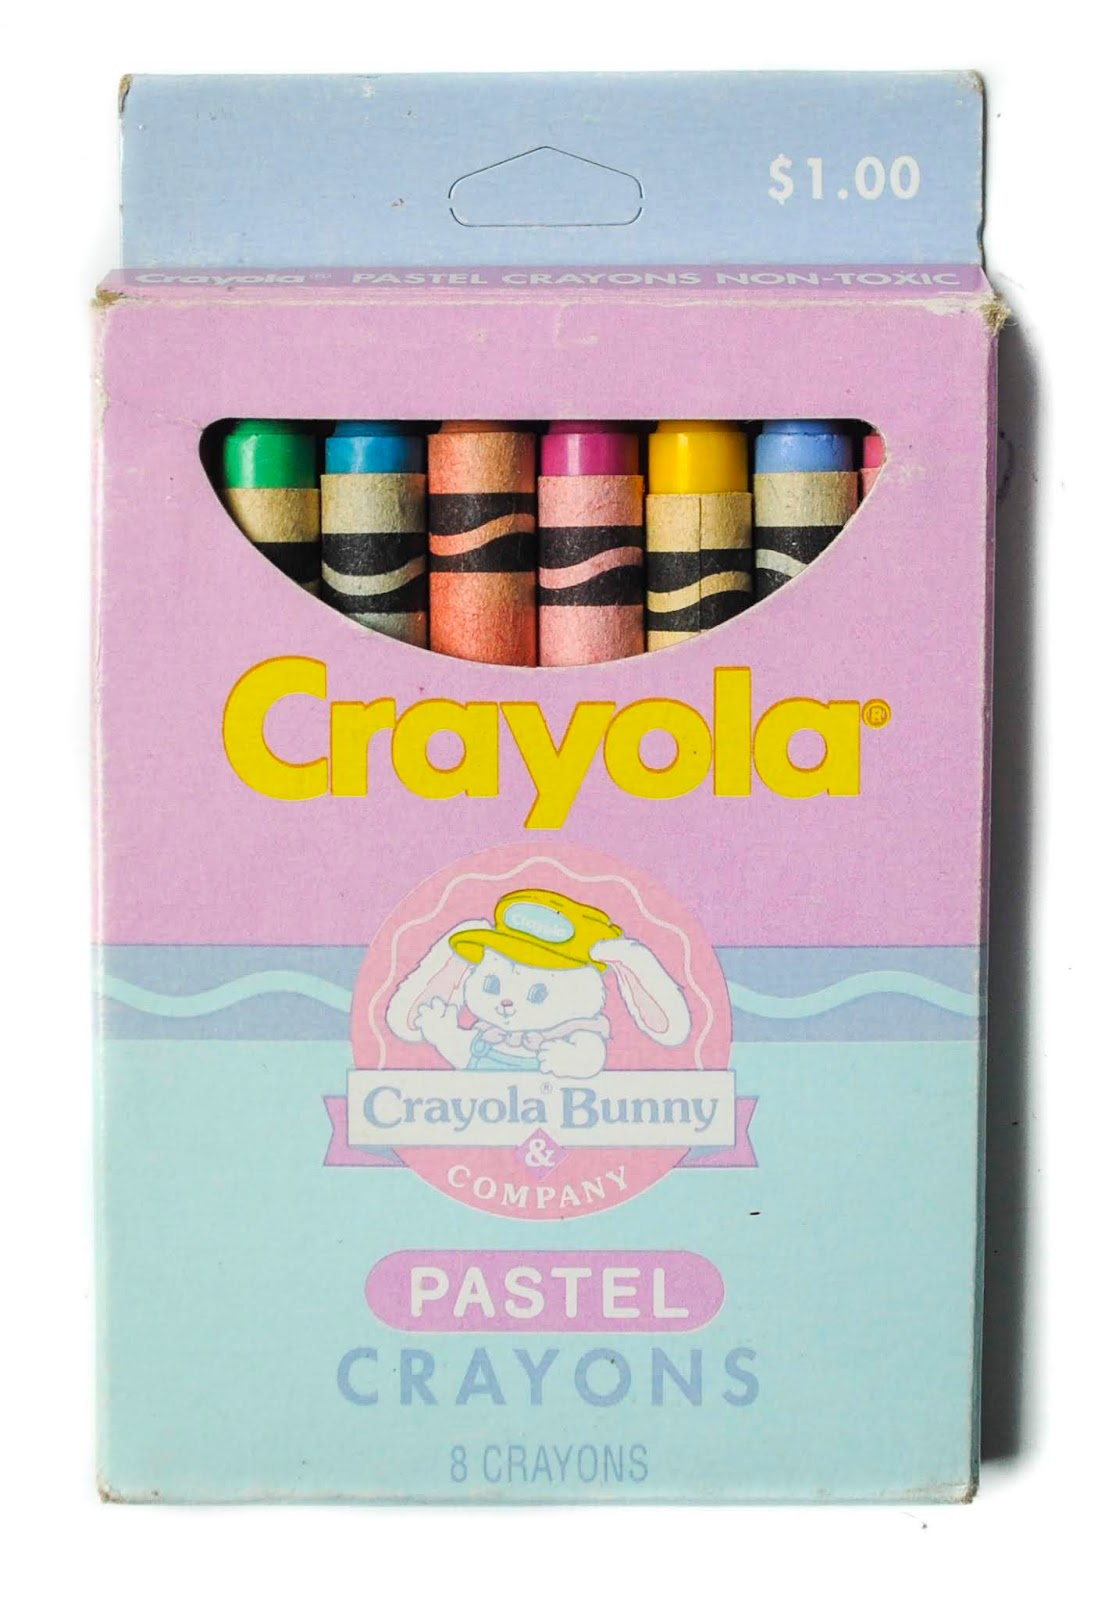 Pastels Get it now - The Stationers